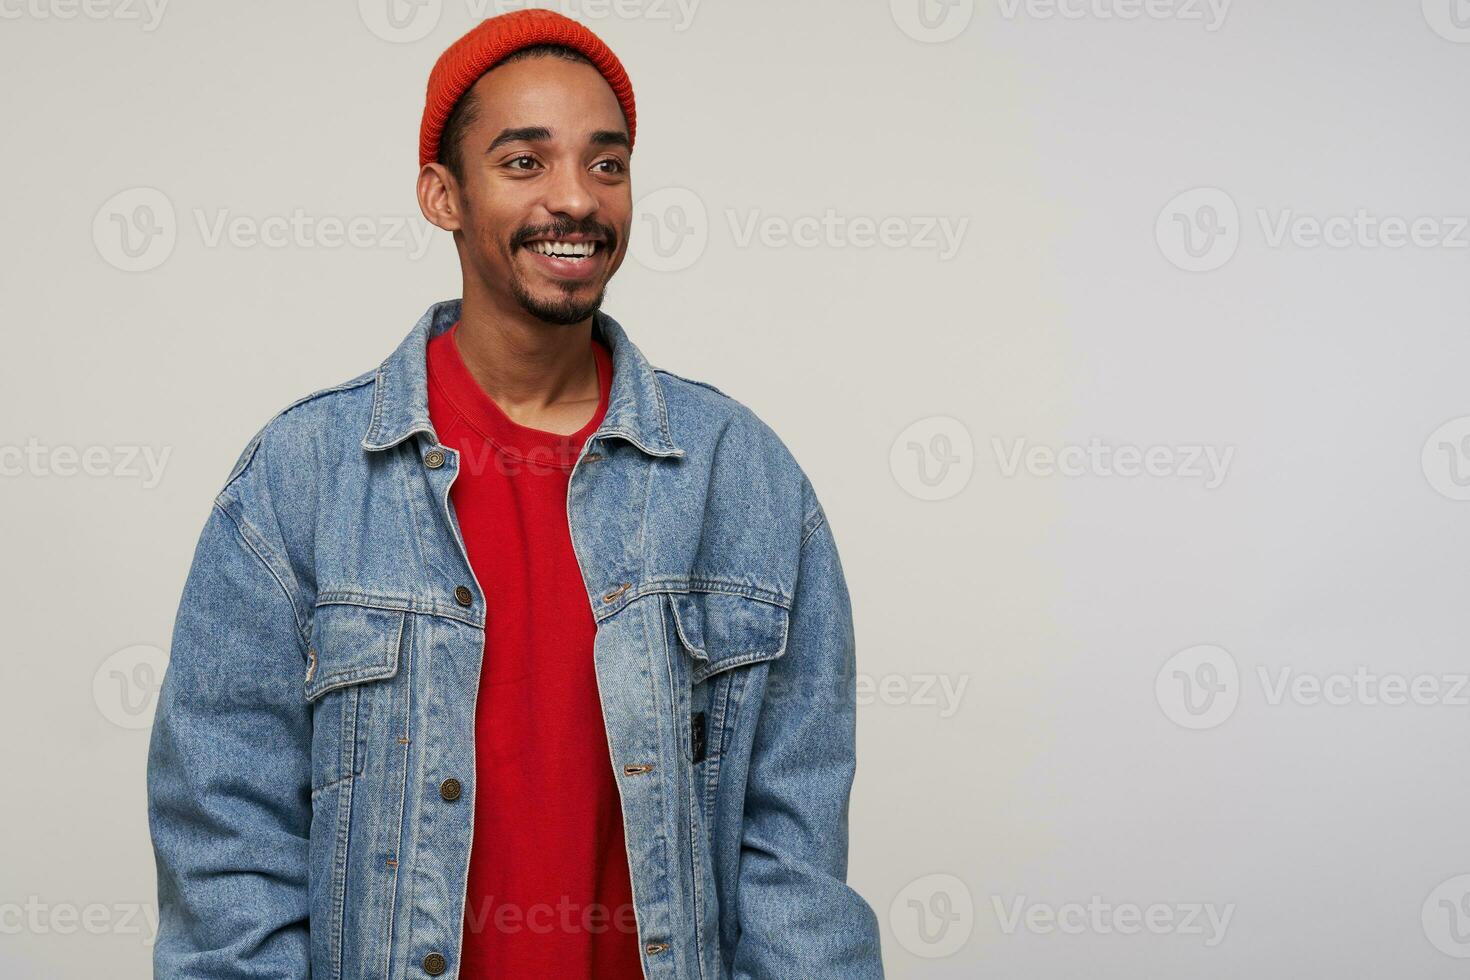 Cheerful attractive young dark haired bearded male with dark skin looking positivel aside with wide happy smile, dressed in red hat, red pullover and jeans coat while posing over white background photo